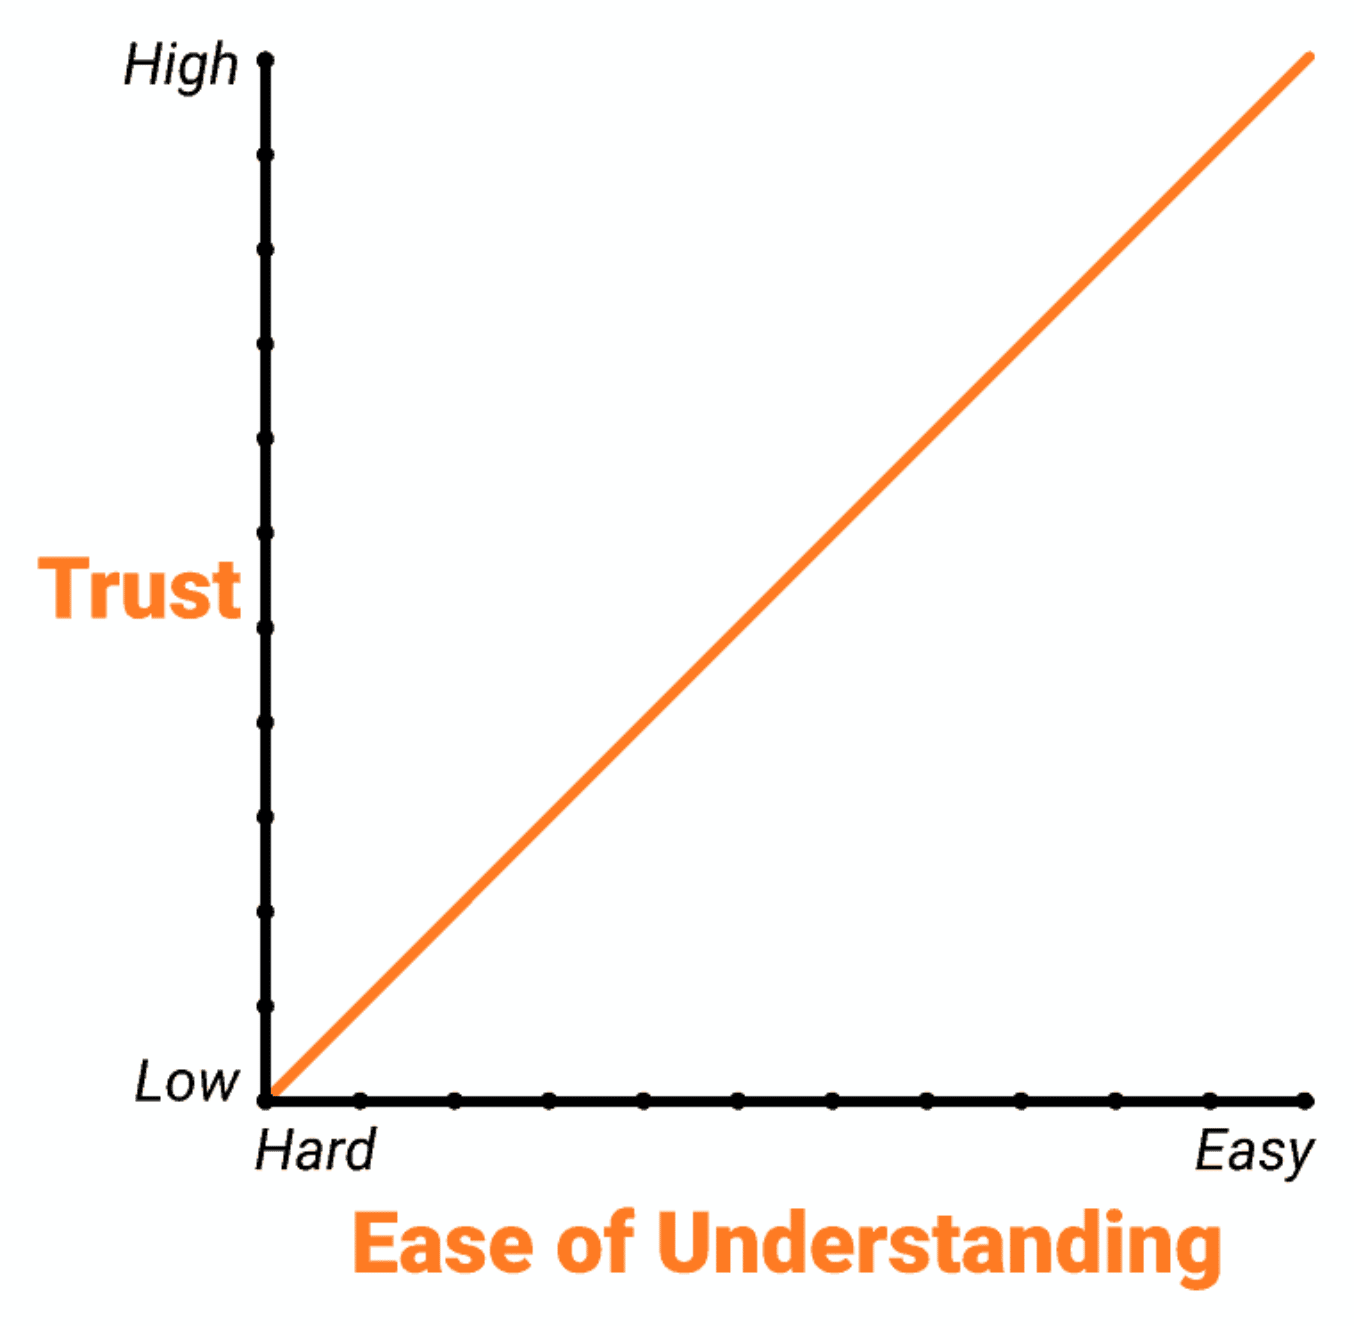 line graph shows that easily understood content is trustworthy